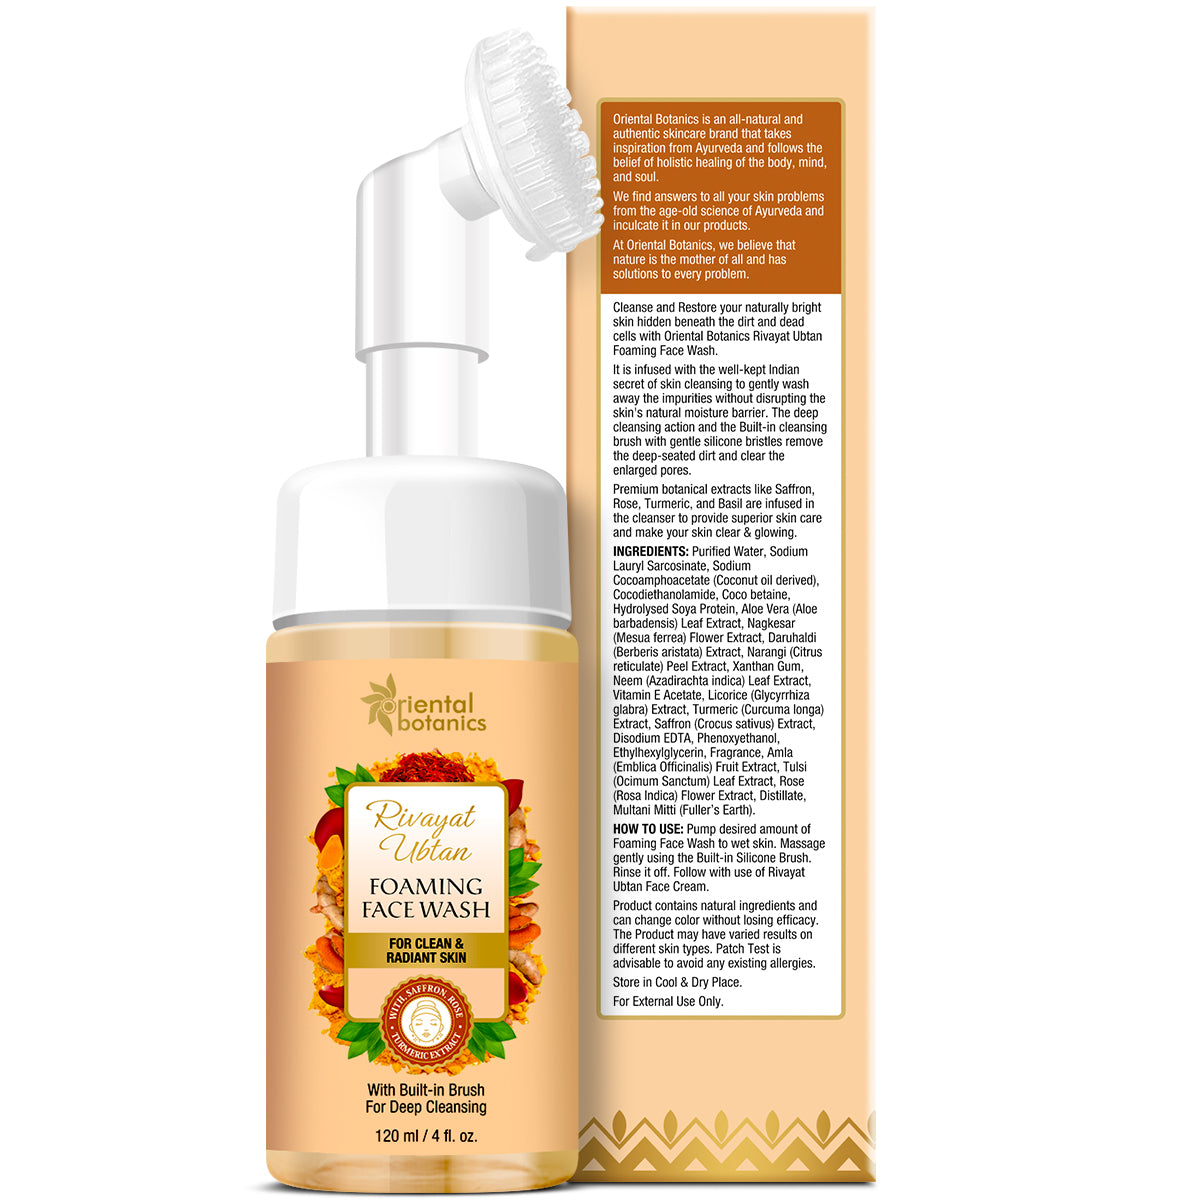 Oriental Botanics Rivayat Ubtan Foaming Face Wash With Built-In Brush, For Clear and Radiant Skin - With Saffron, Rose and Turmeric Extract, 120 ml